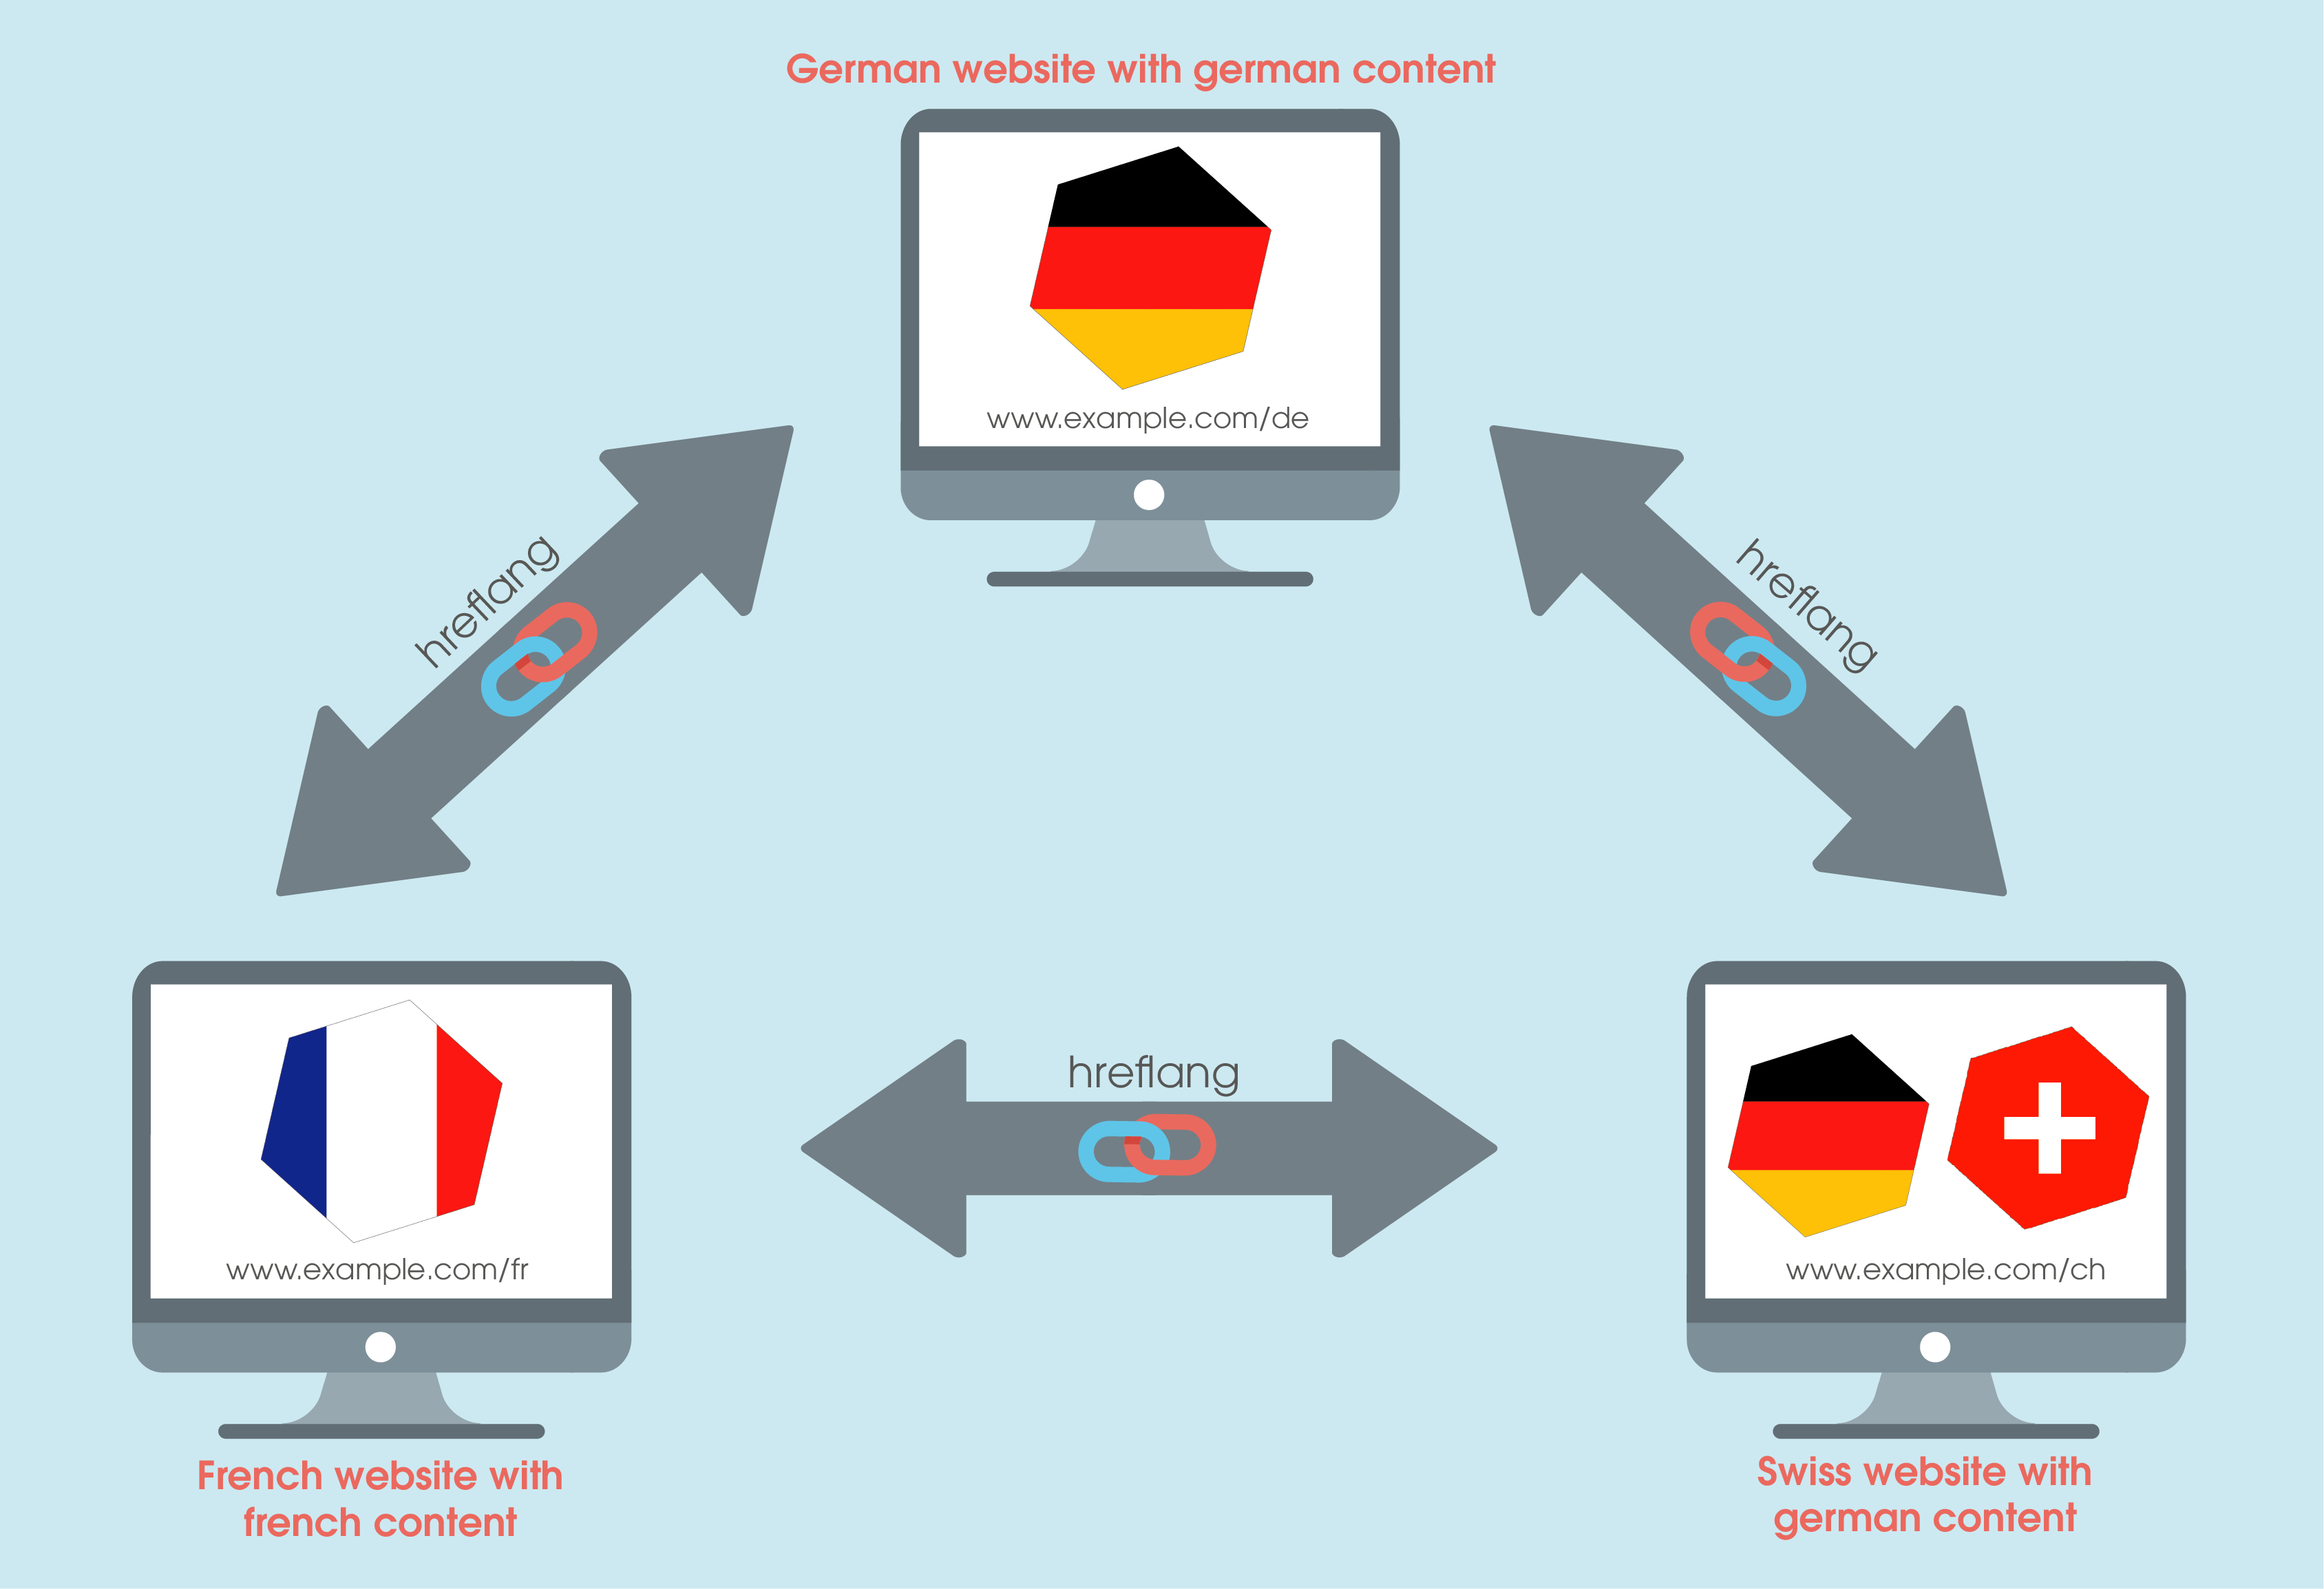 The image shows the interaction between a German, a Swiss and a French website, which are linked via the hreflang attribute.